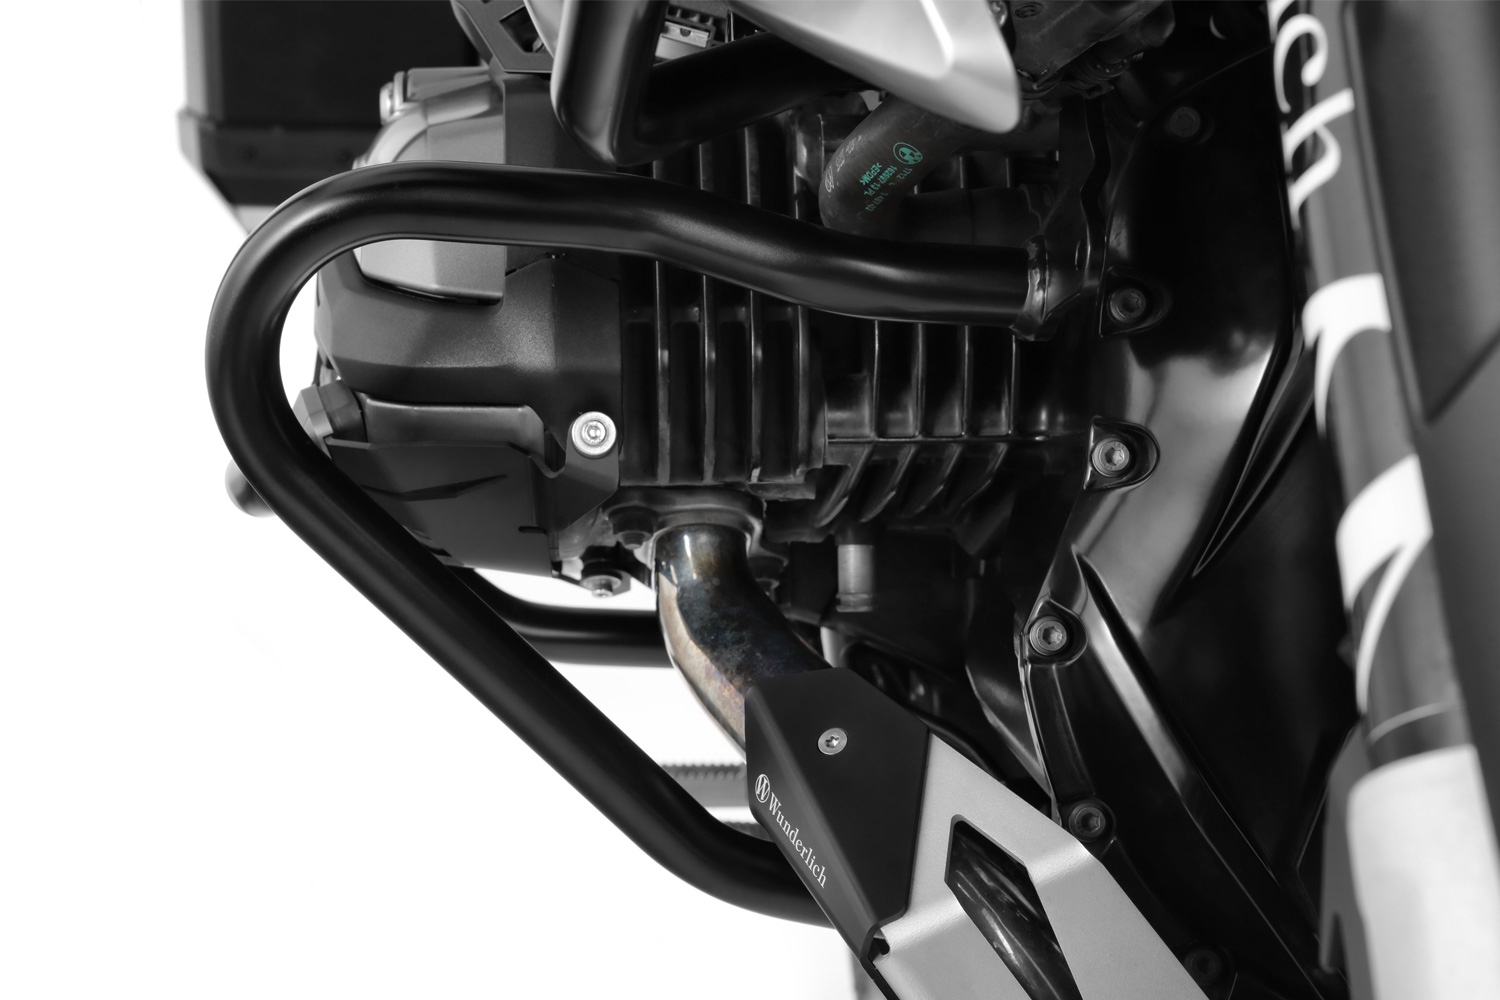 Wunderlich's engine protection bars